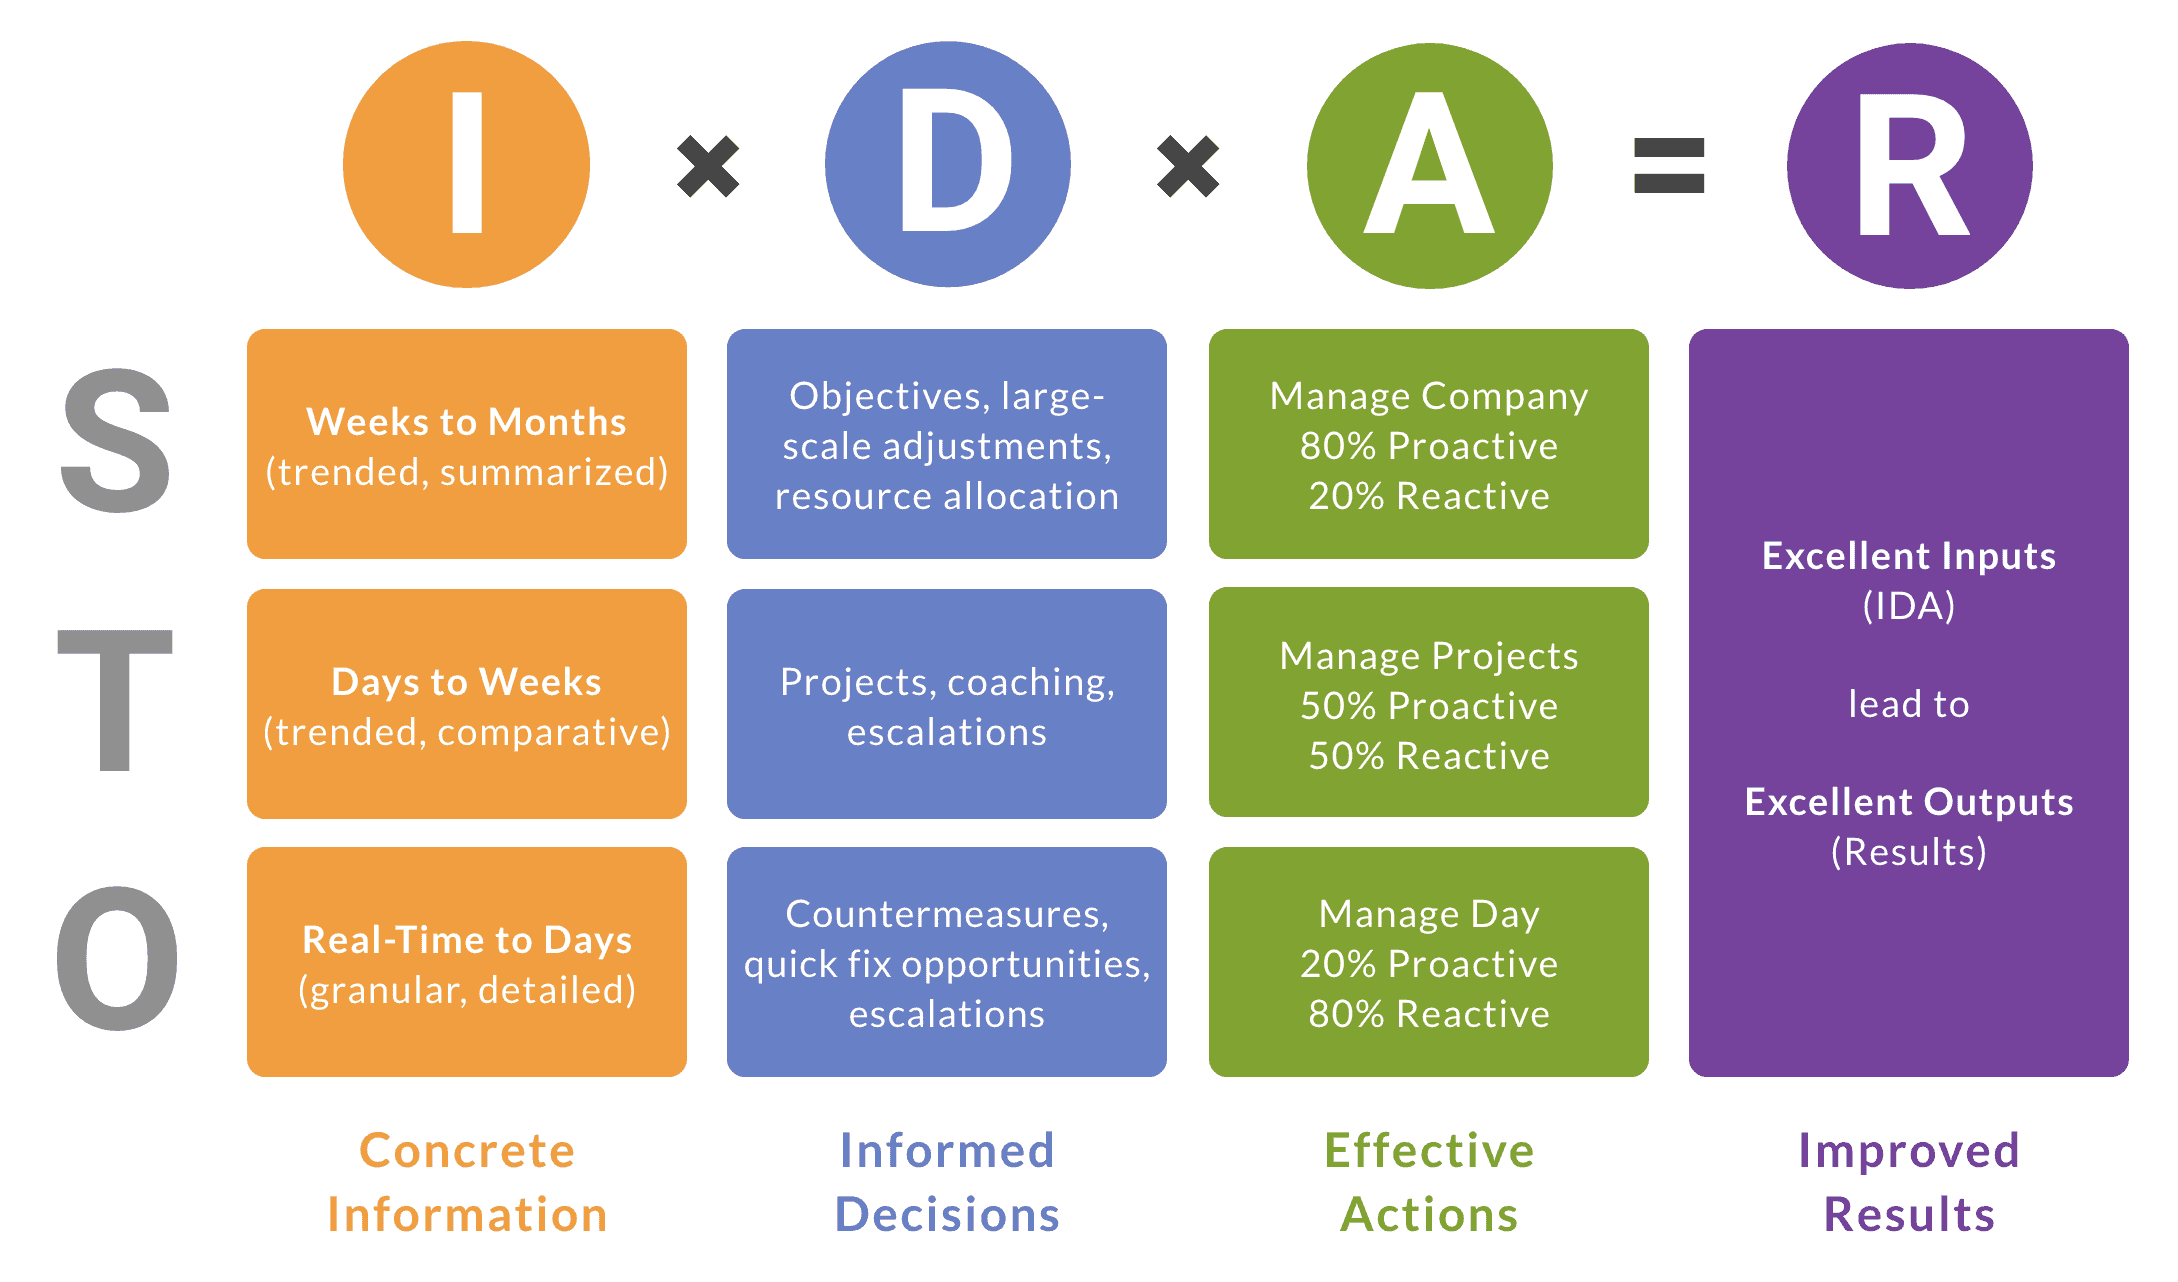 Infographic showing the IDA equation and tactics for achieving each step of the equation.